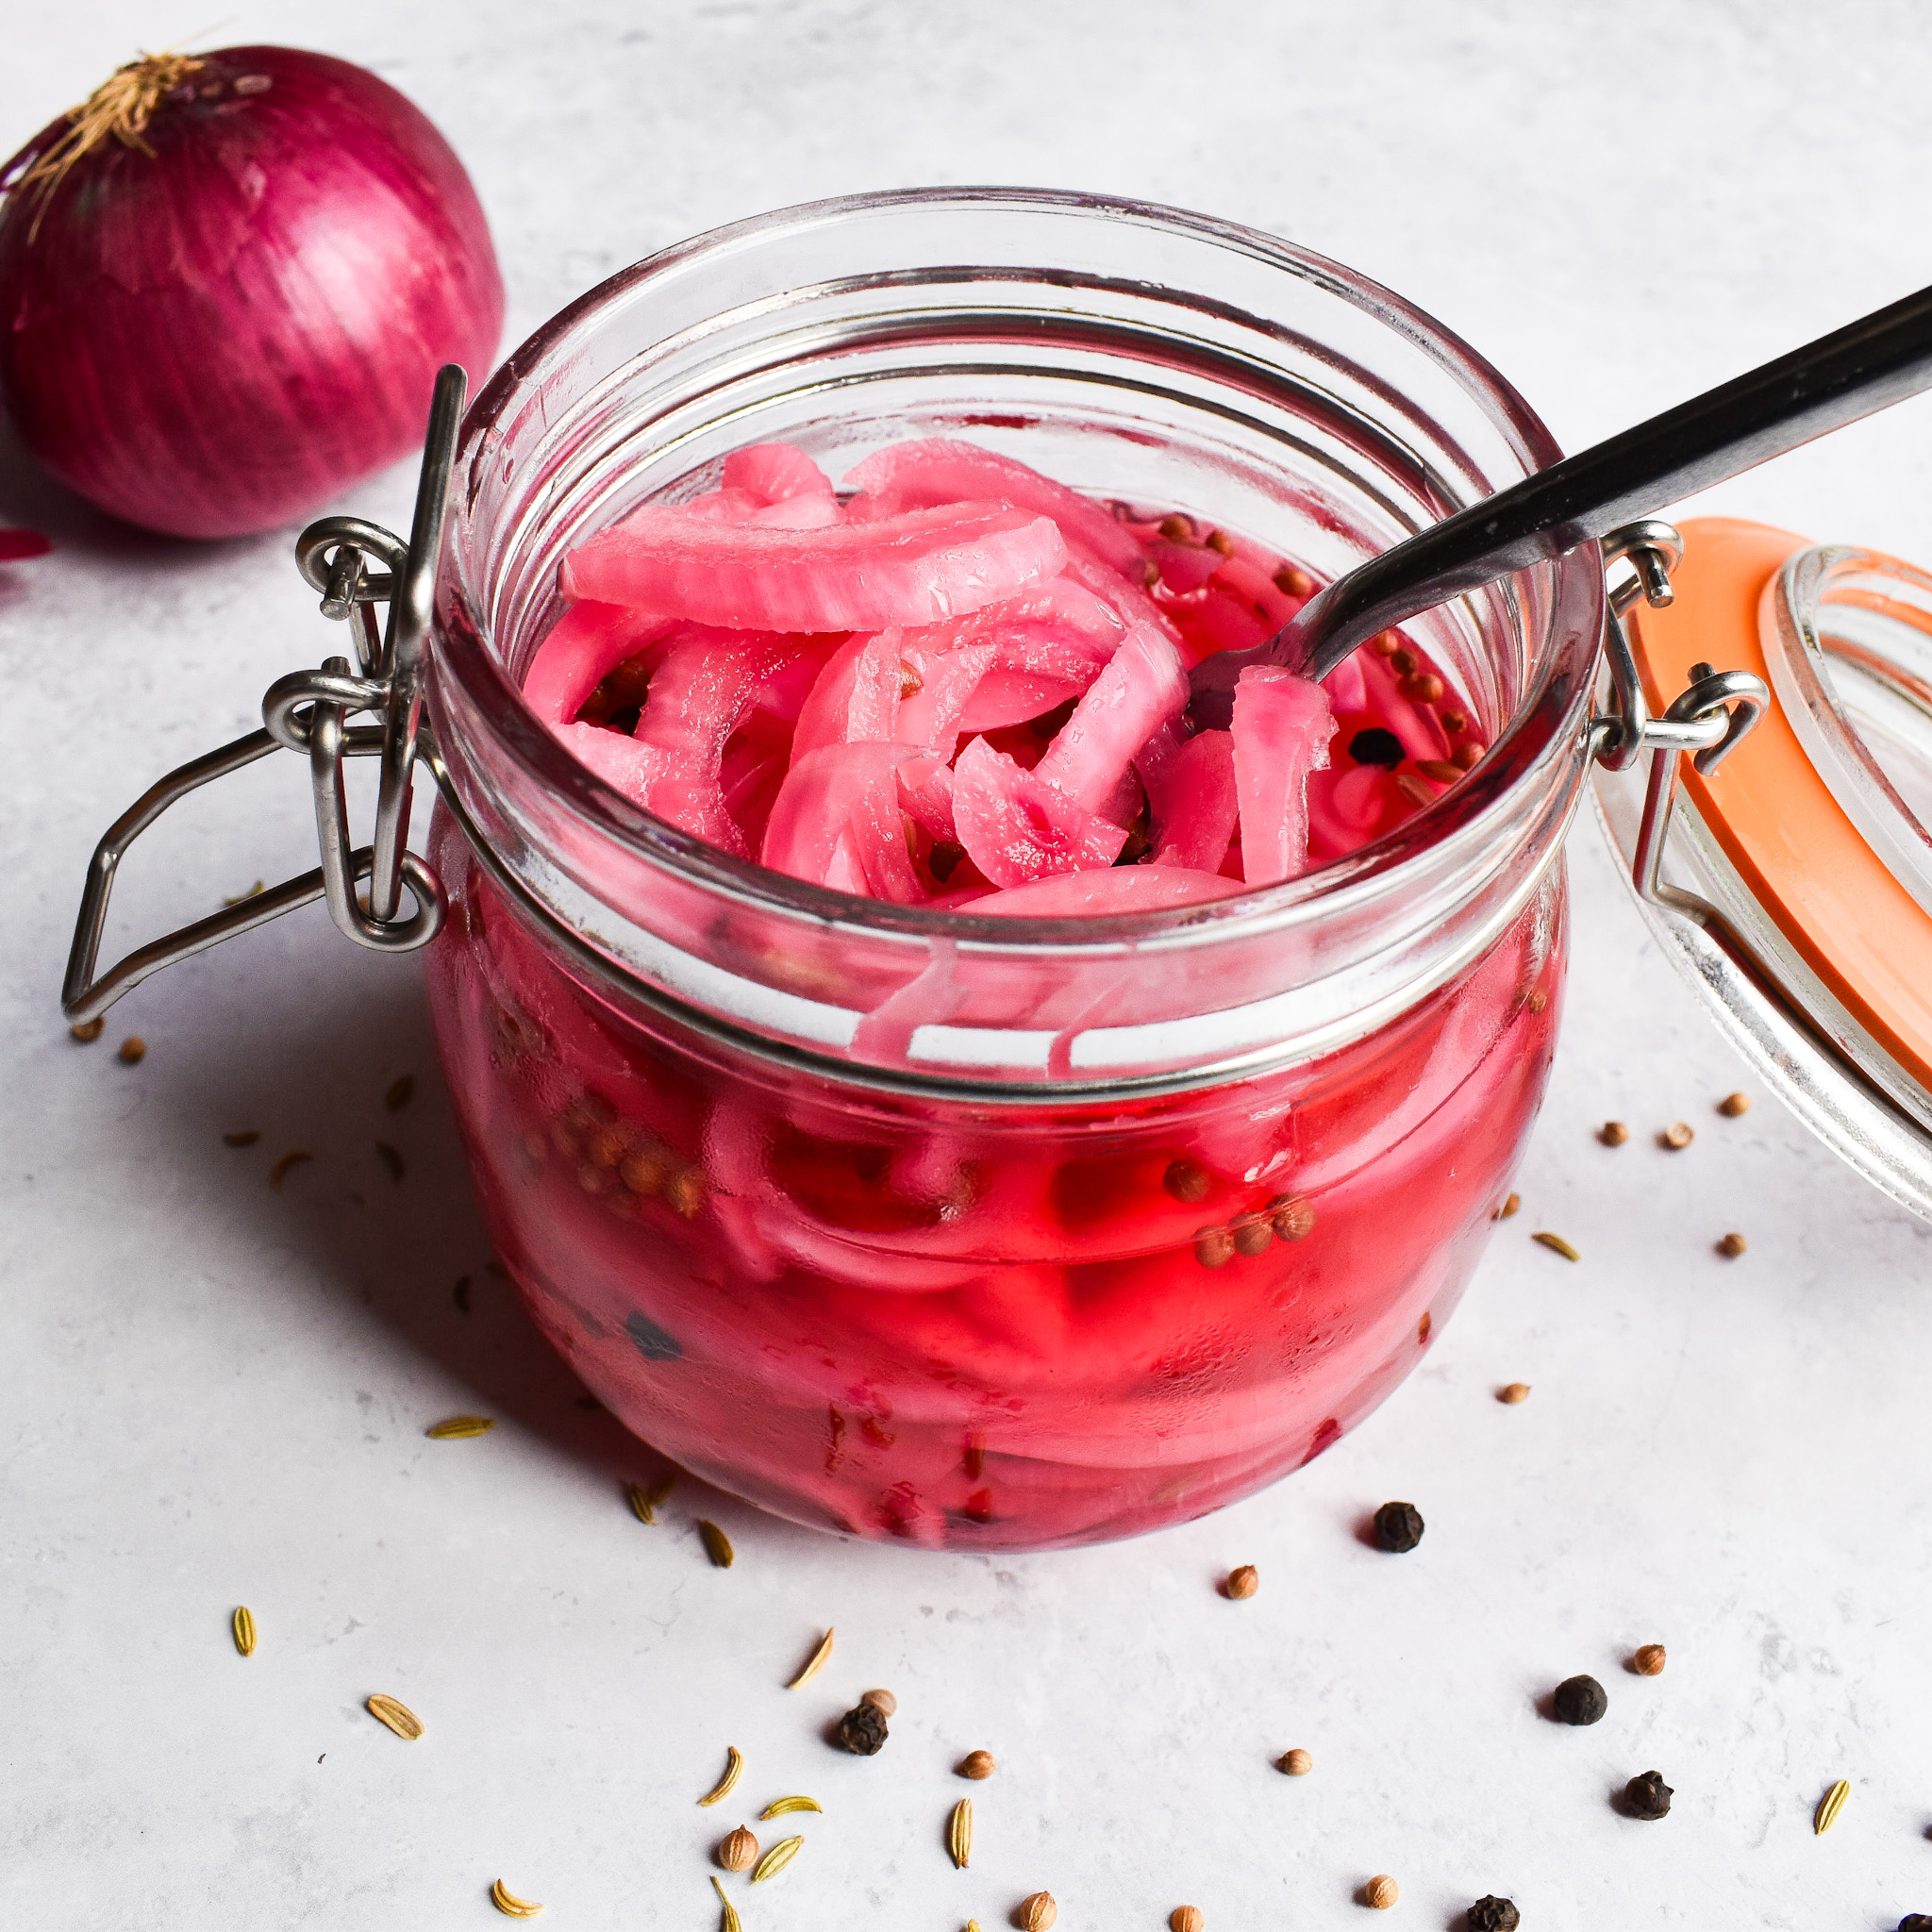 pickled red onion